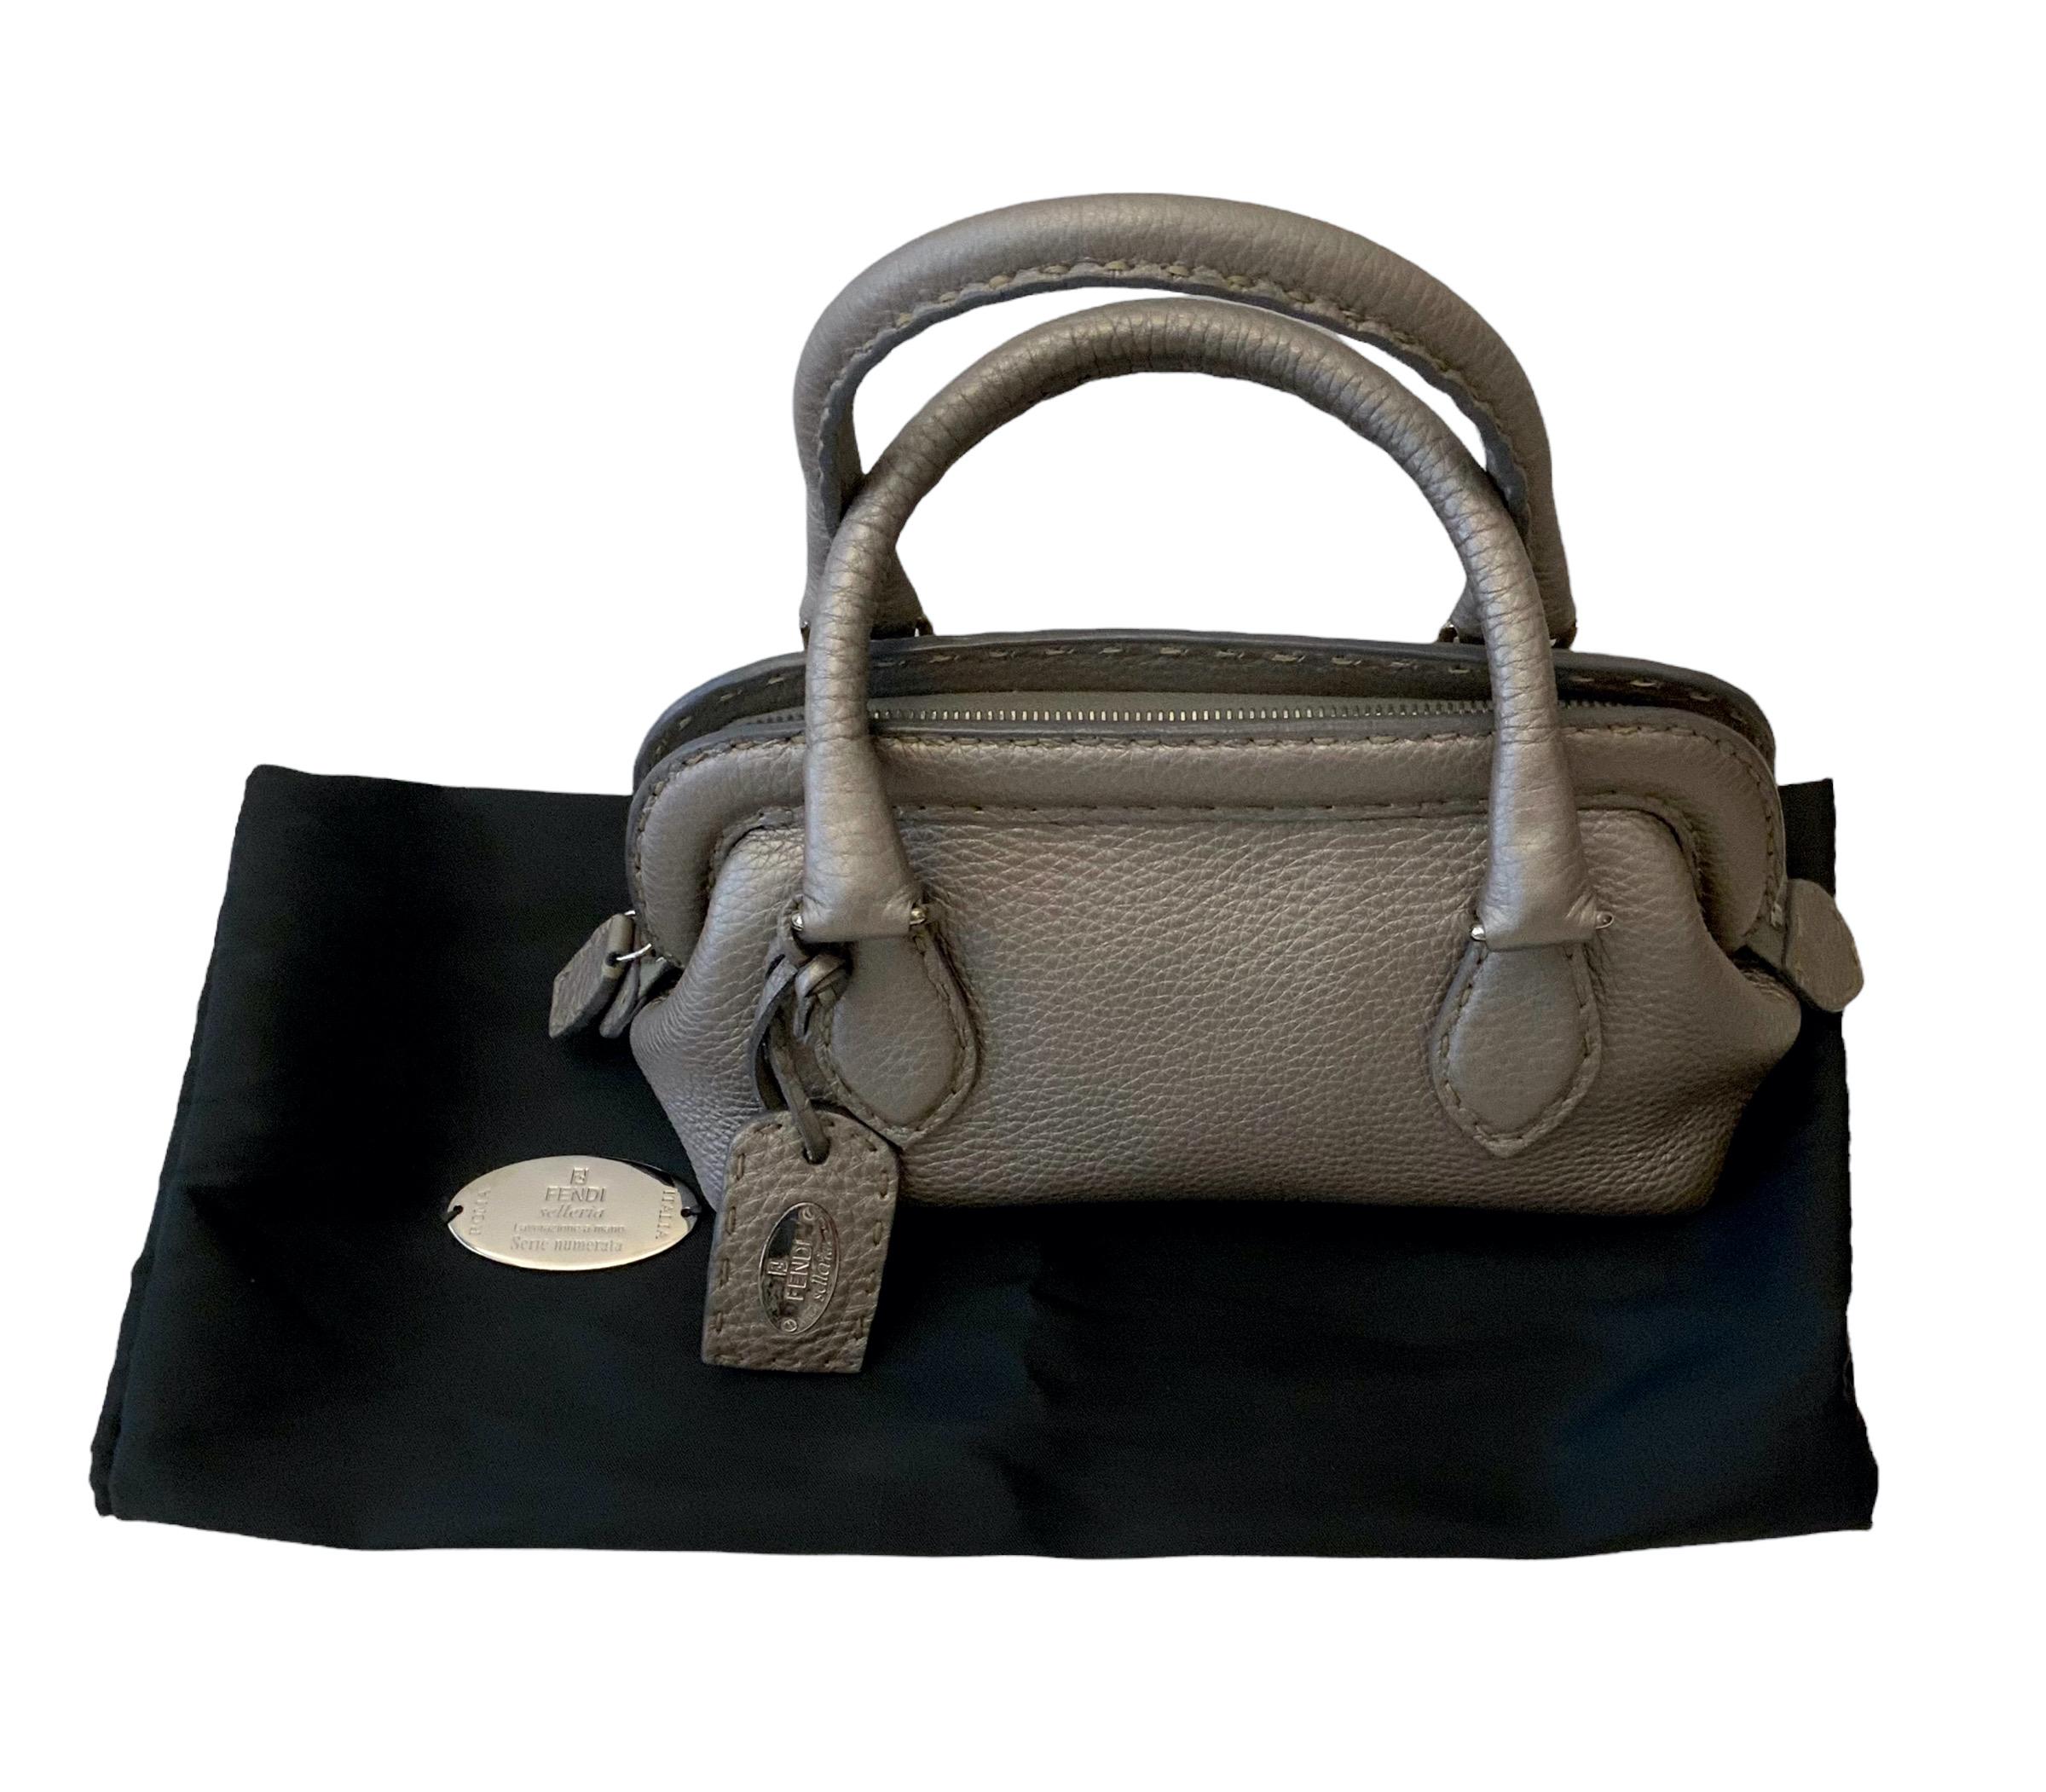 Named after the wife of founder Edoardo Fendi, our pre-owned but as new Mini Adele Bag is crafted of grained calfskin leather in metallic grey taupe color. 
It features hand stitched rolled leather top handles and leather top crest. 
The inside is